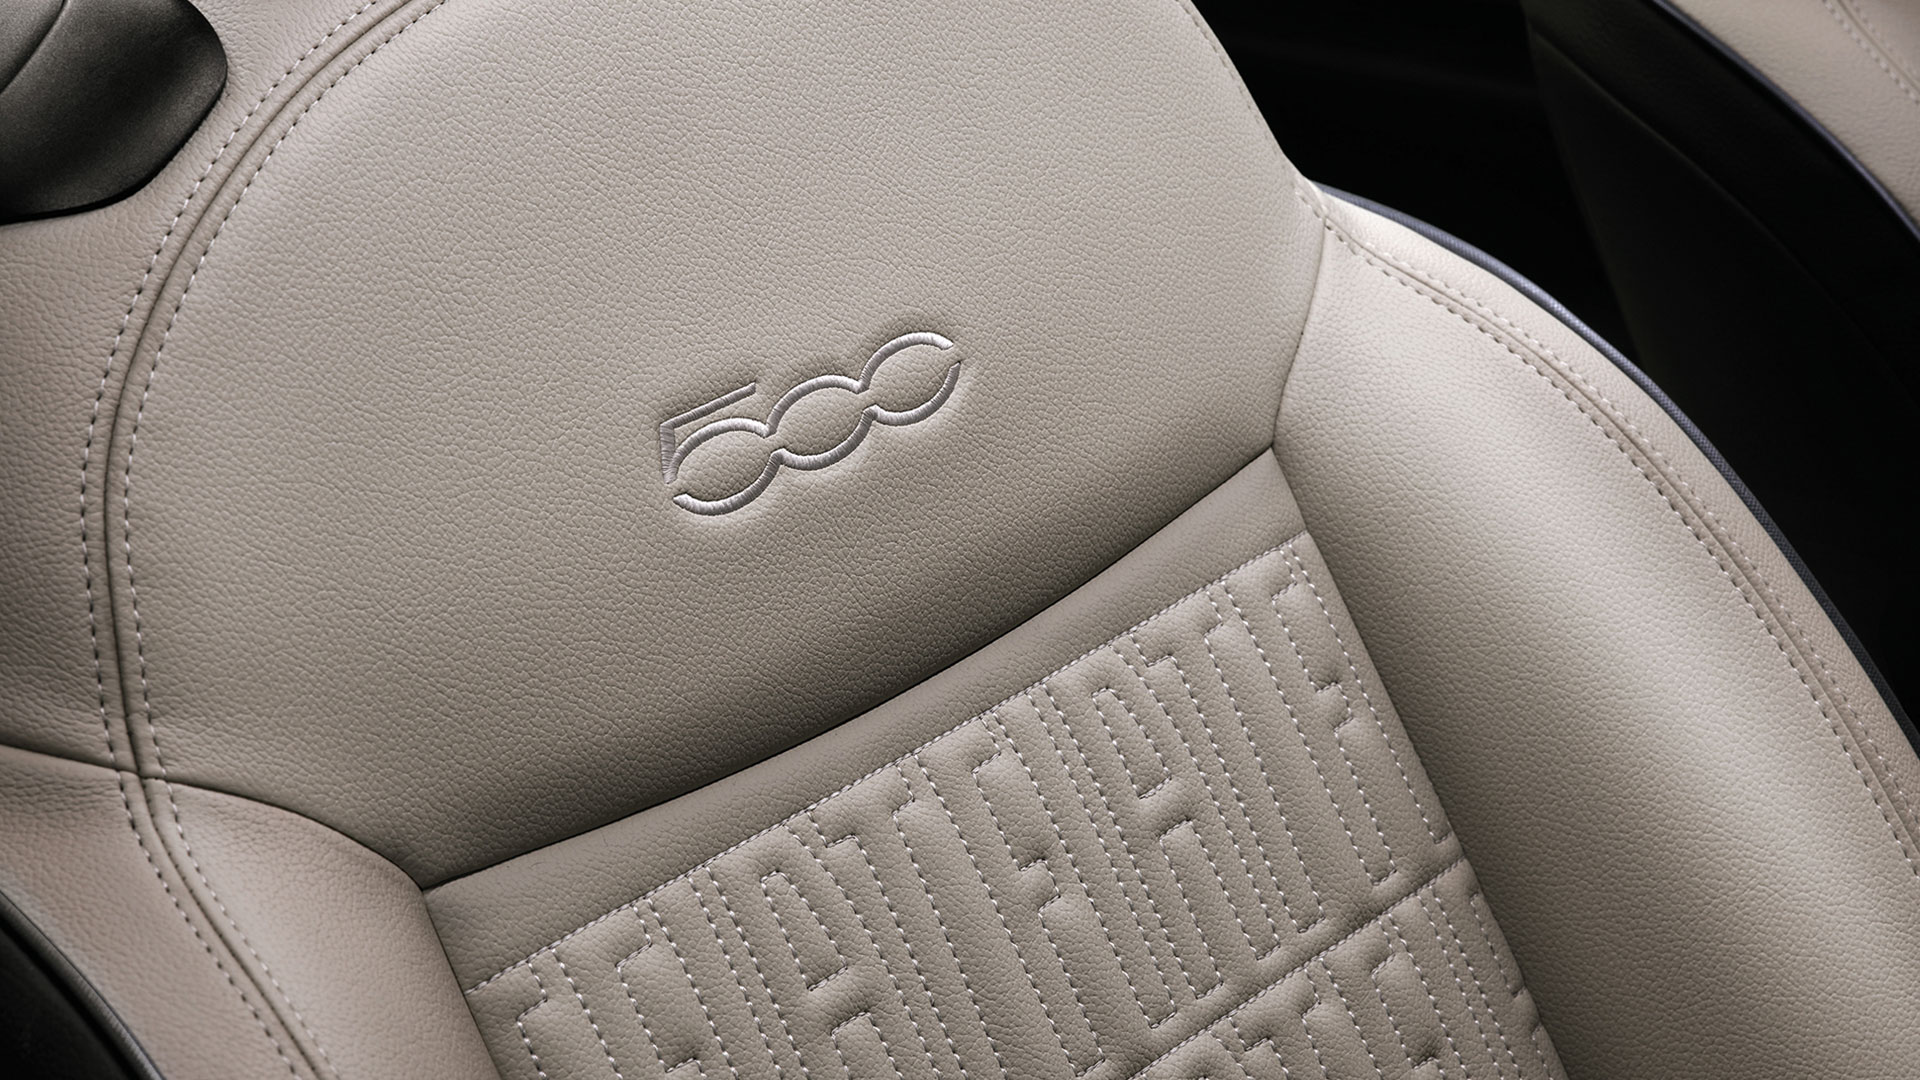 PREMIUM INTERIORS WITH SOFT TOUCH SEATS WITH FIAT MONOGRAM